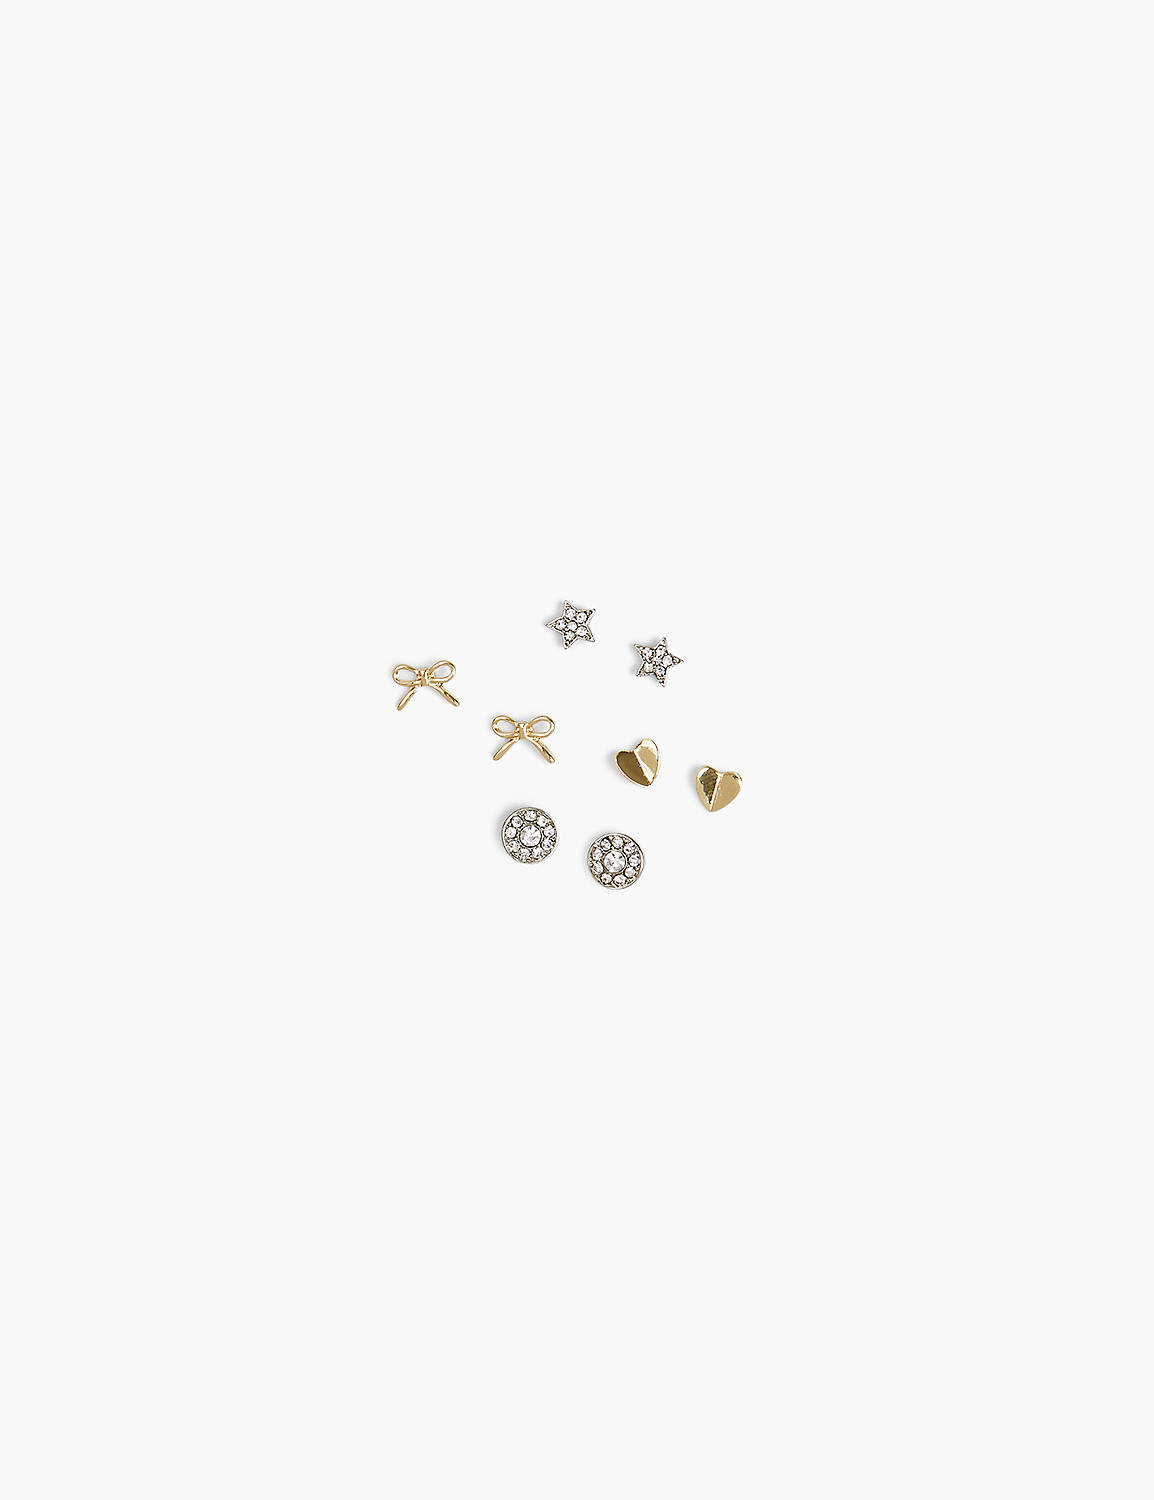 Mixed Icon Stud Earrings 4 Pack Product Image 1